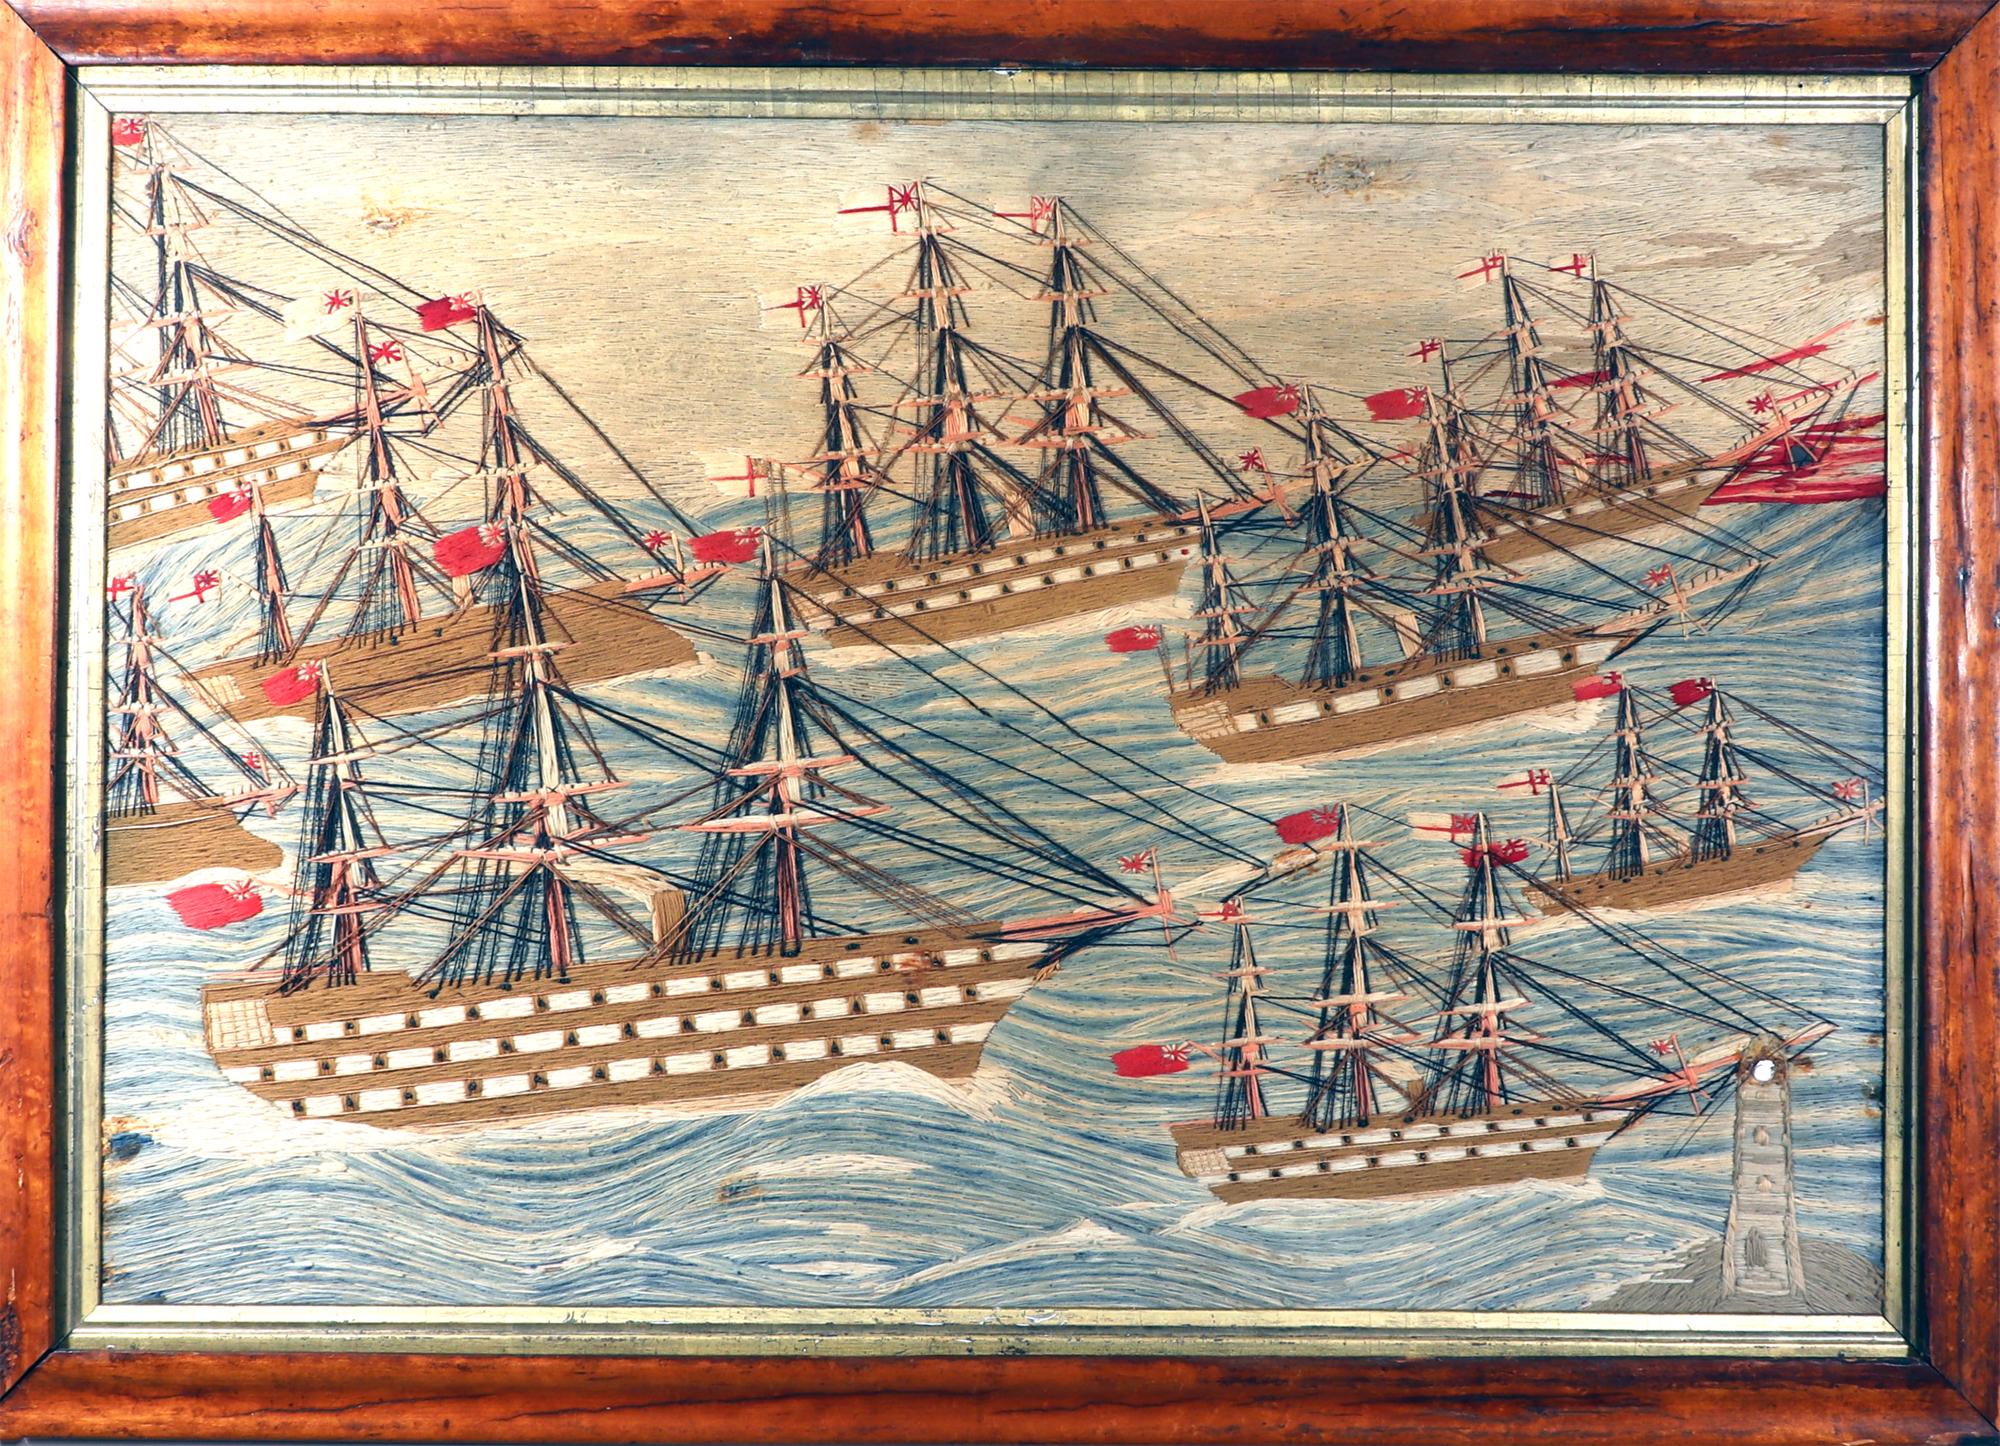 Sailor's woolwork of a fleet of nine royal navy ships,
1875

A wonderful and dramatic sailor's woolie of a starboard view of a fleet of nine Royal Navy ships of a variety of different classes including two ram-bow Ironsides, one probably the